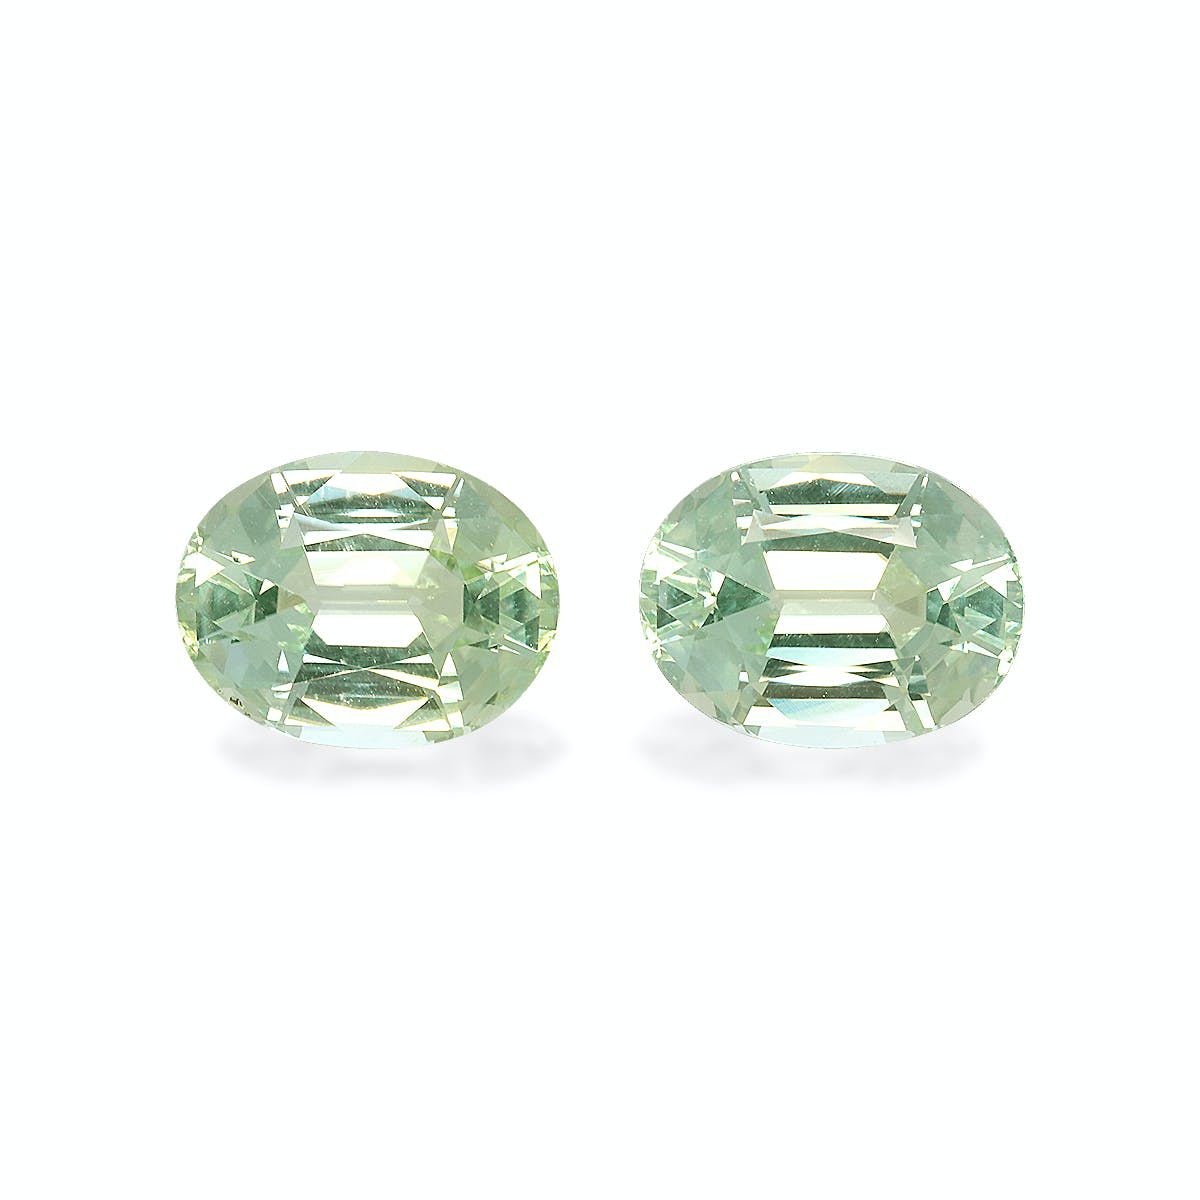 Picture of Mist Green Tourmaline 9.20ct - 11x9mm Pair (TG1559)